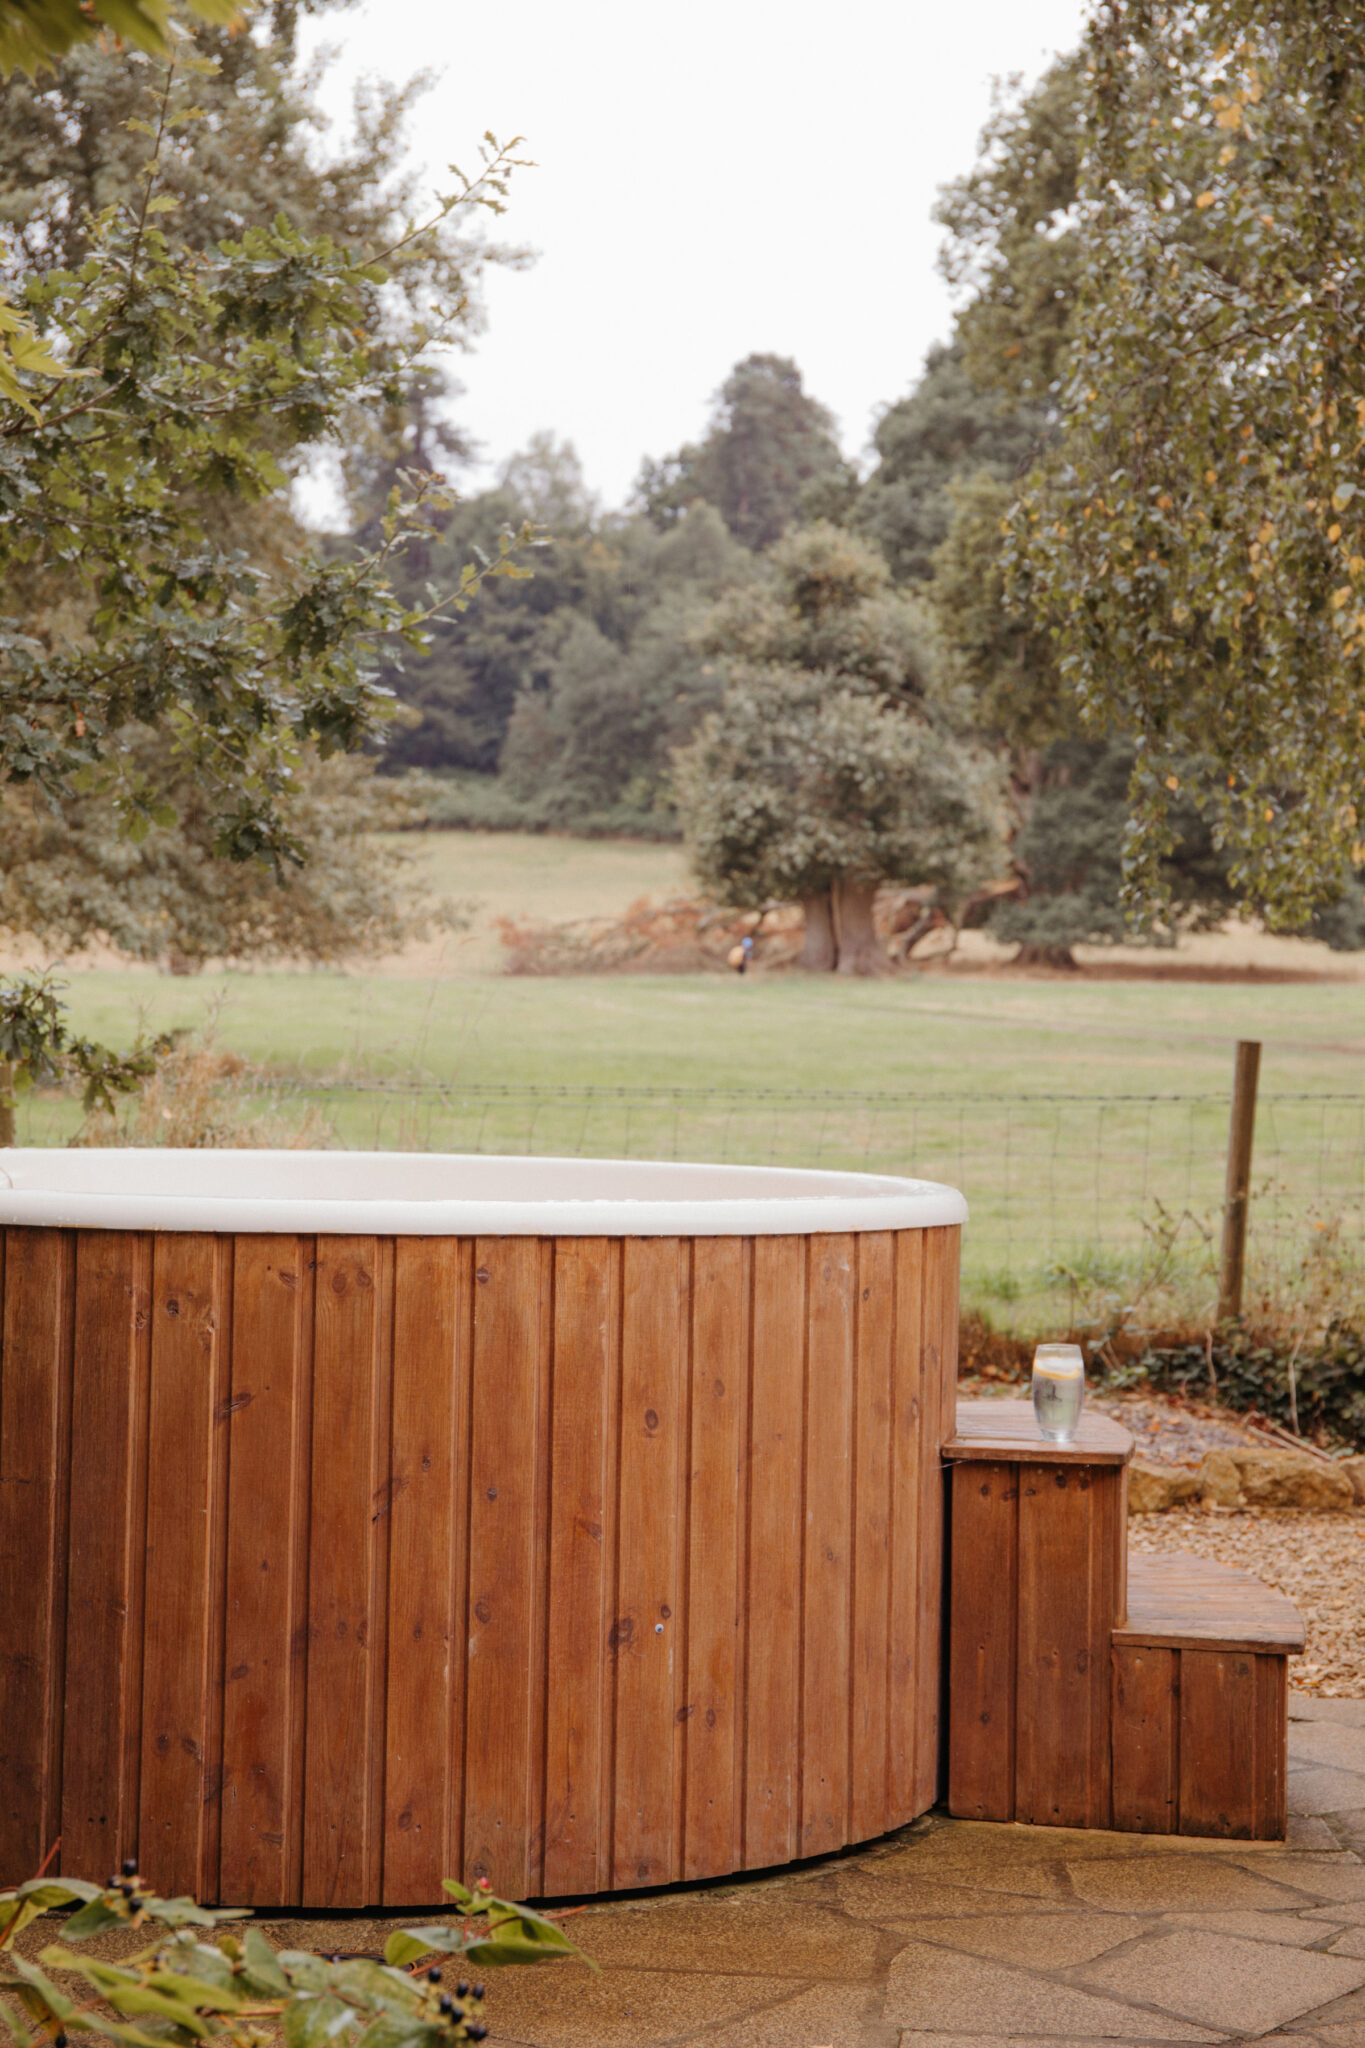 A wooden hot tub in the countryside